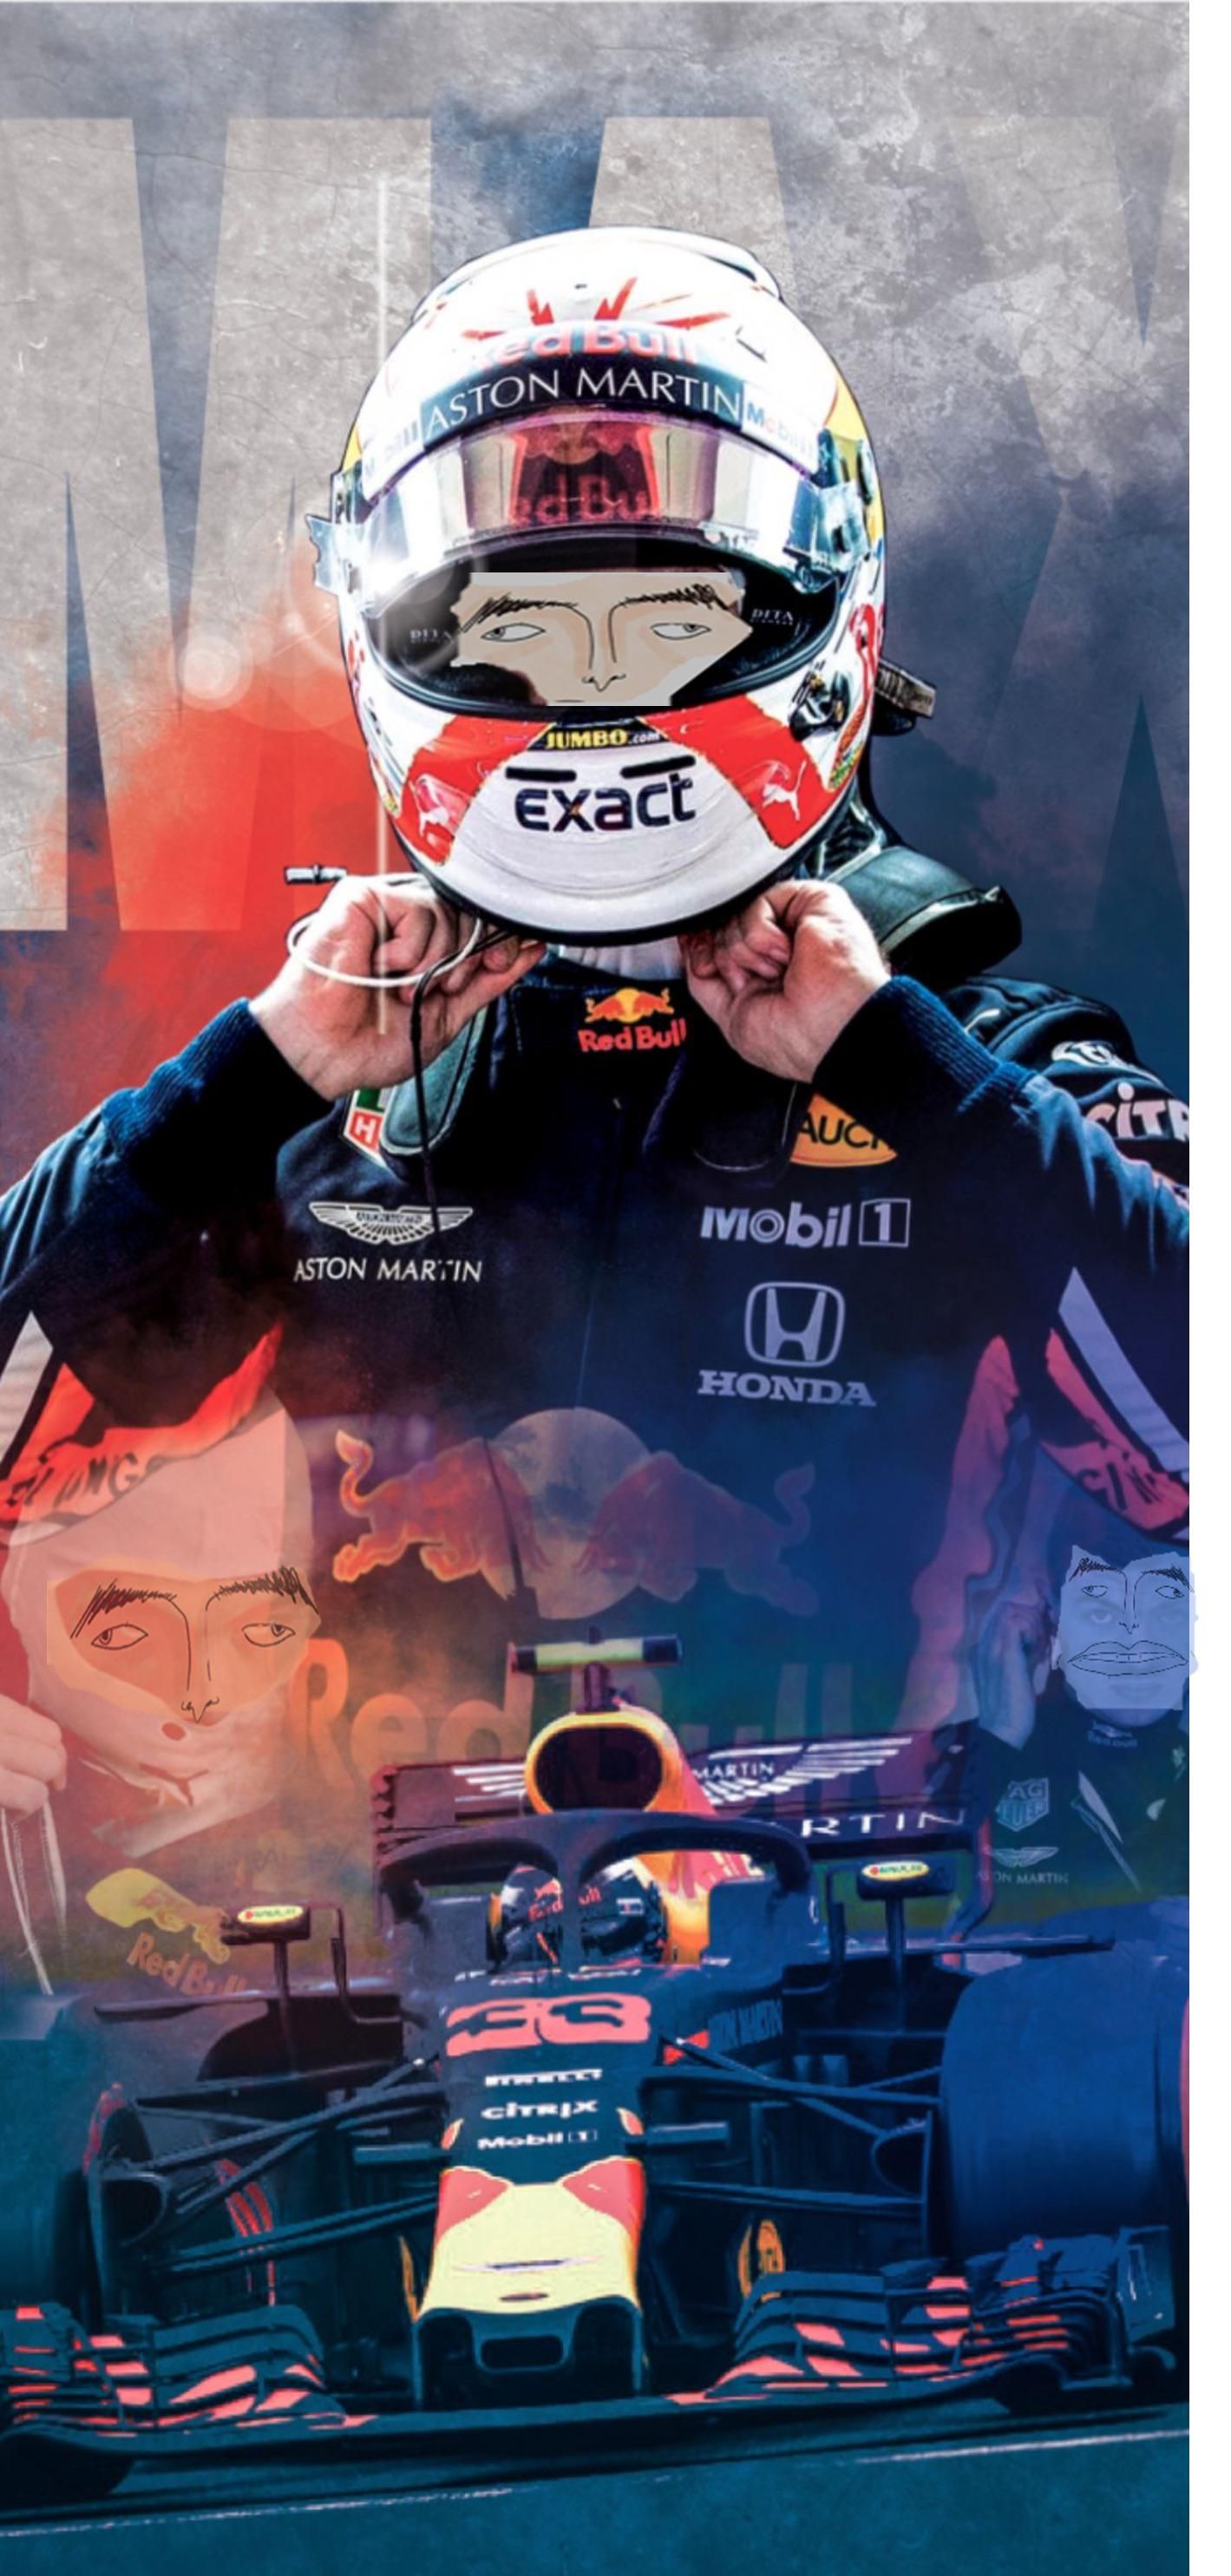 New wallpaper how are we feeling about it ?- ThorGift.com you like it please buy some from ThorGift.com. Max verstappen, Red bull racing, Red bull f1